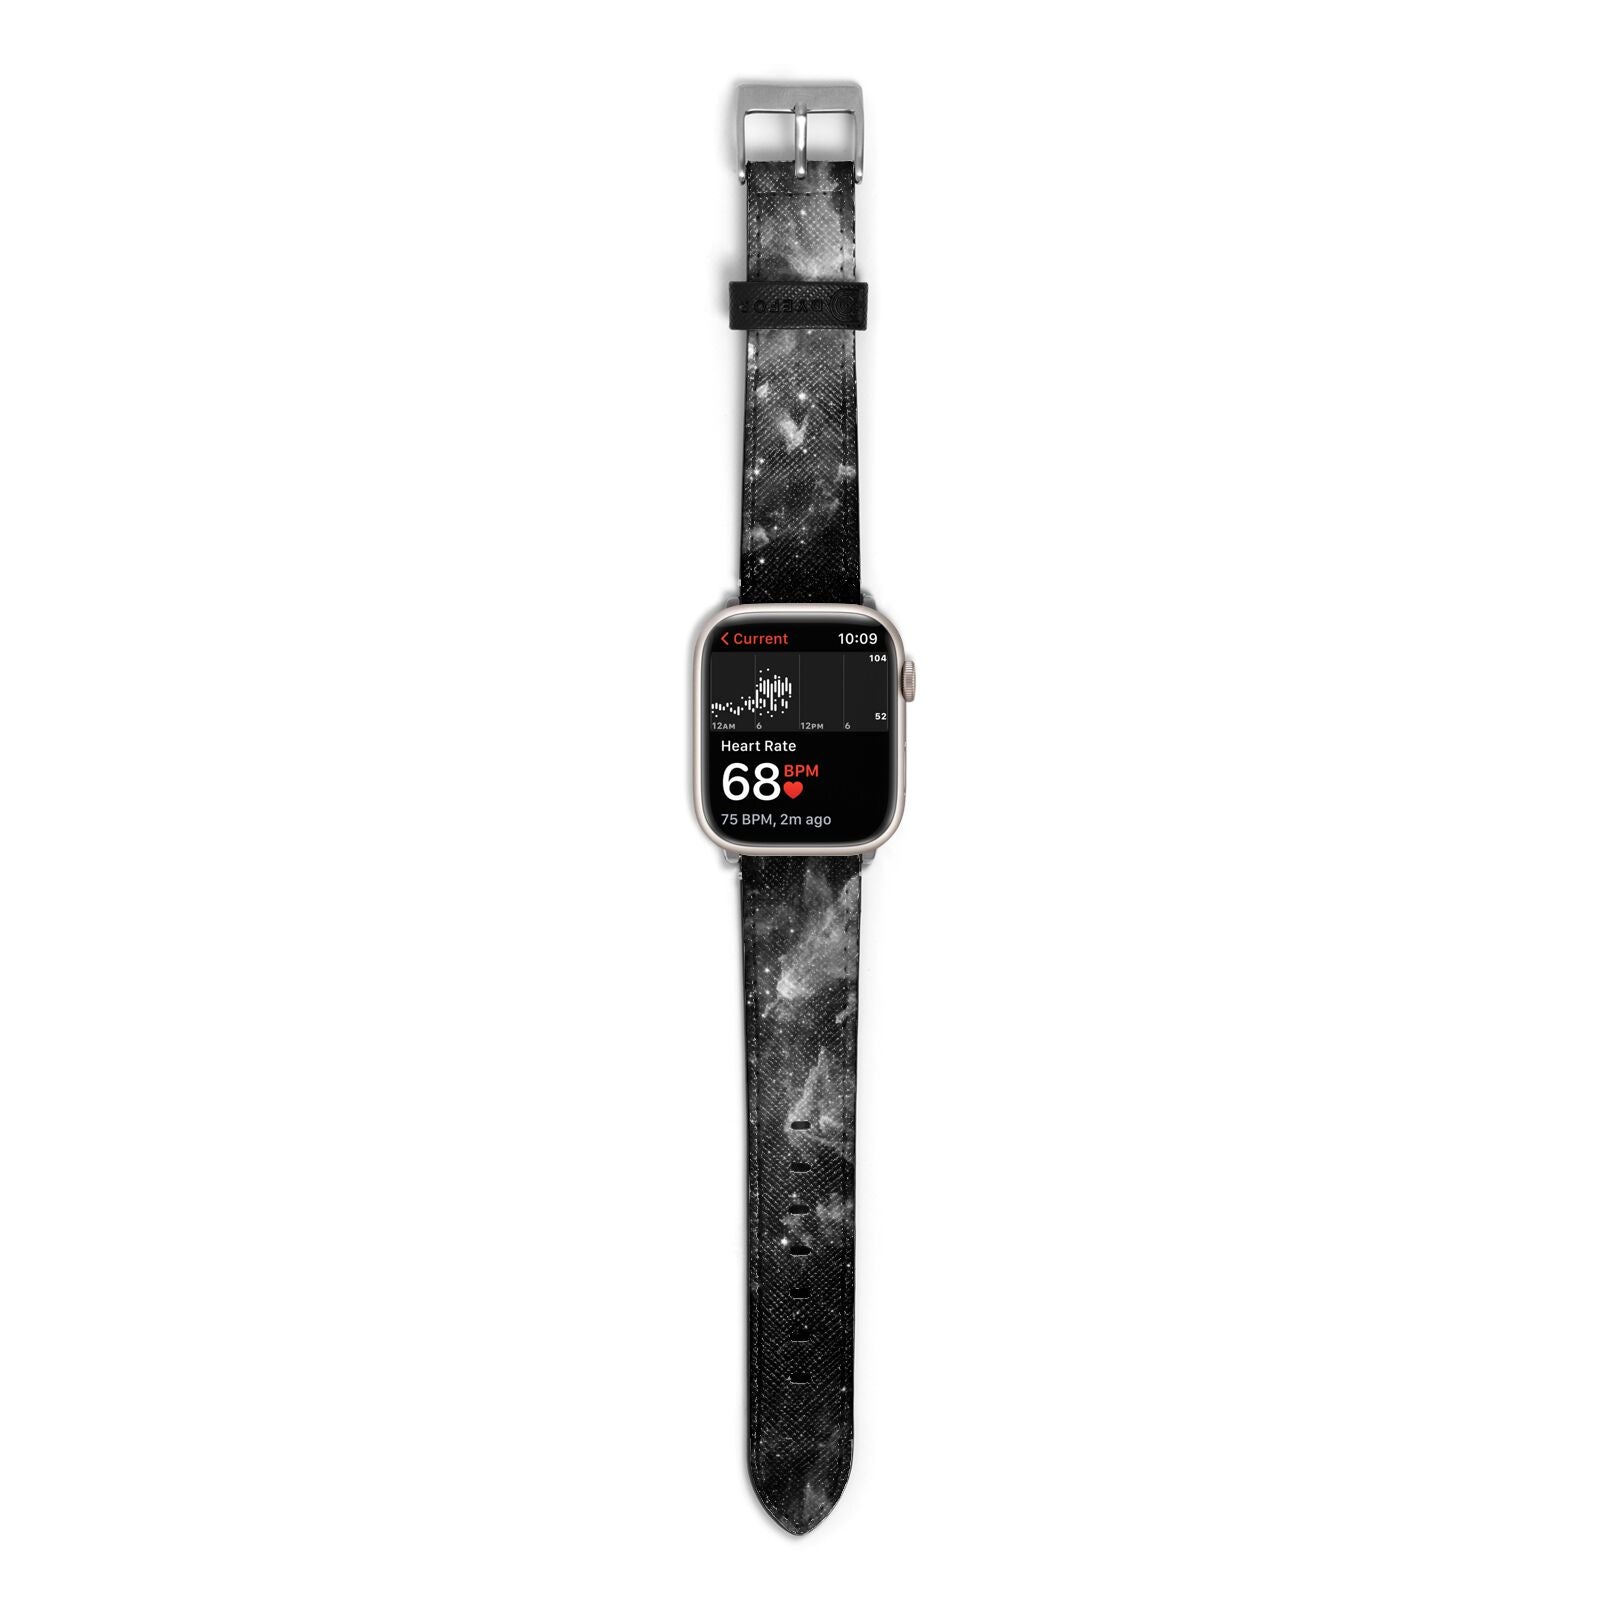 Black Space Apple Watch Strap Size 38mm with Silver Hardware